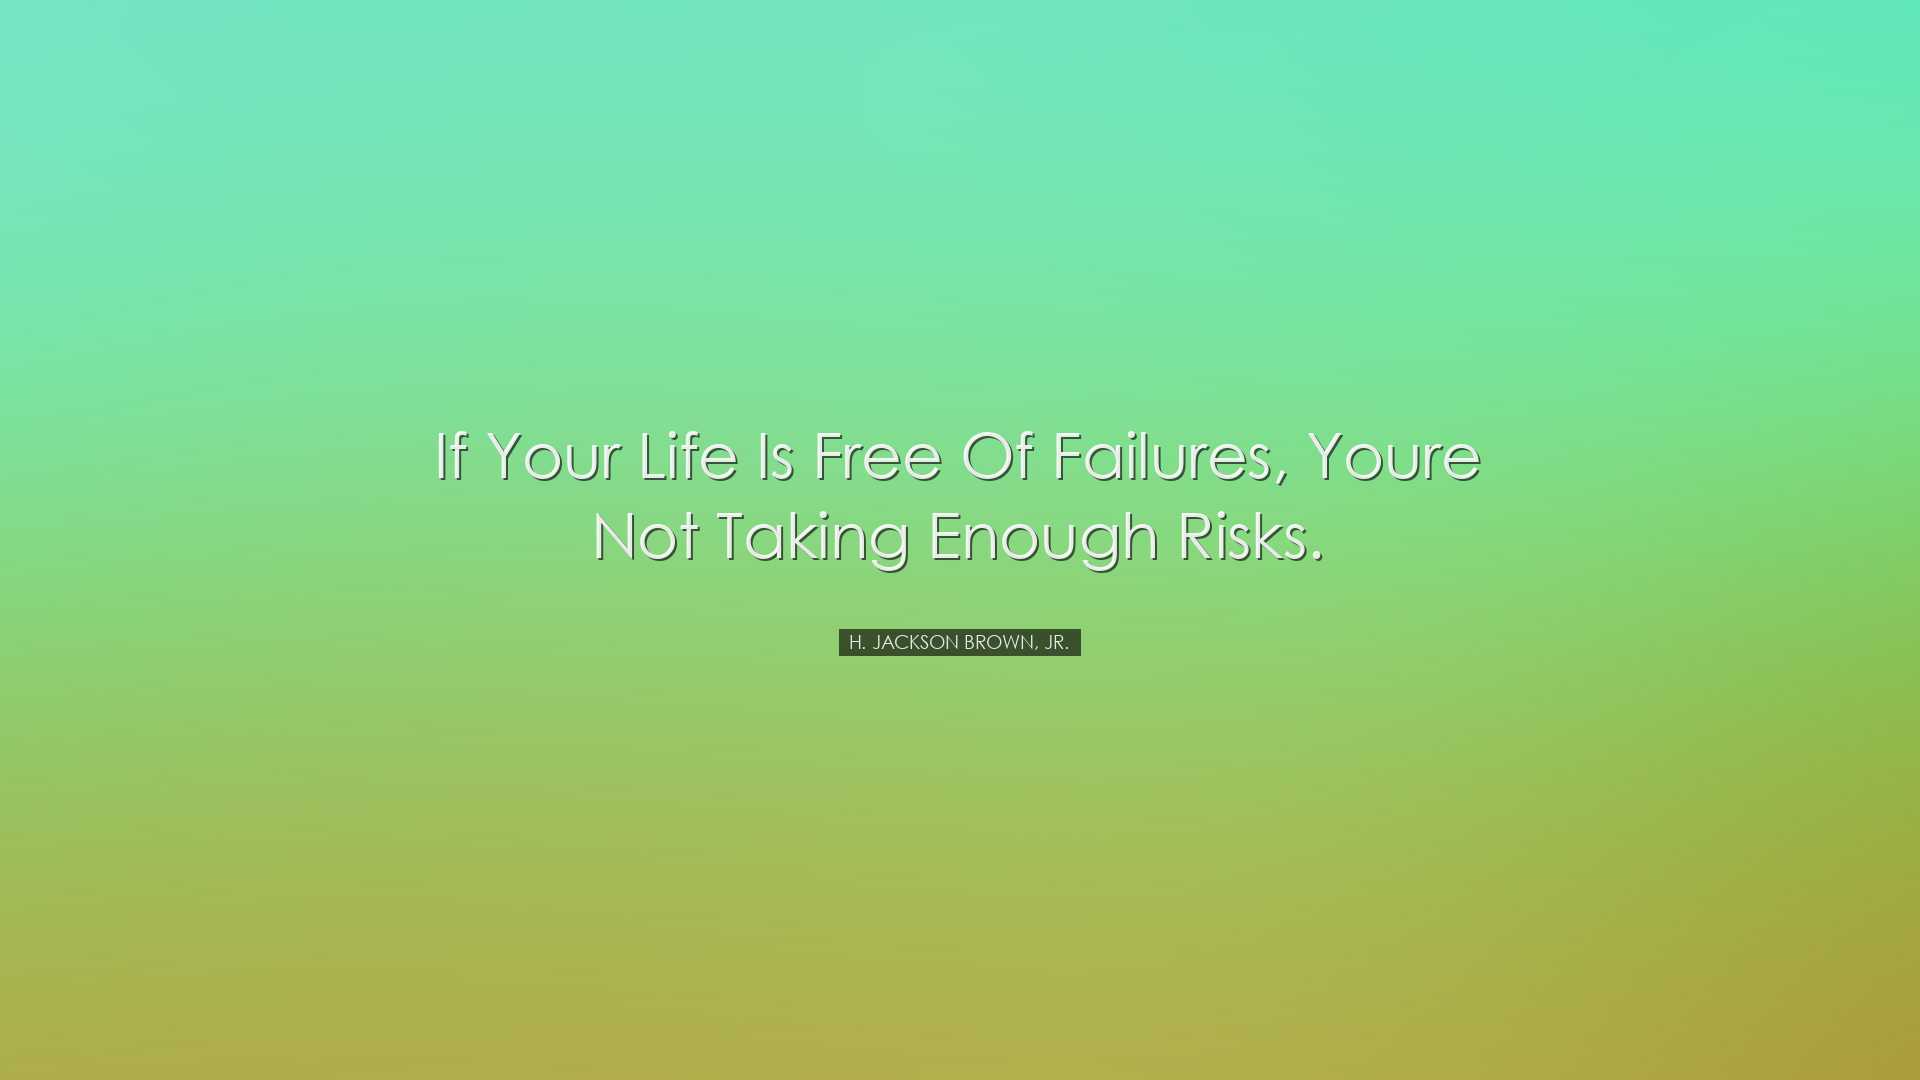 If your life is free of failures, youre not taking enough risks. -